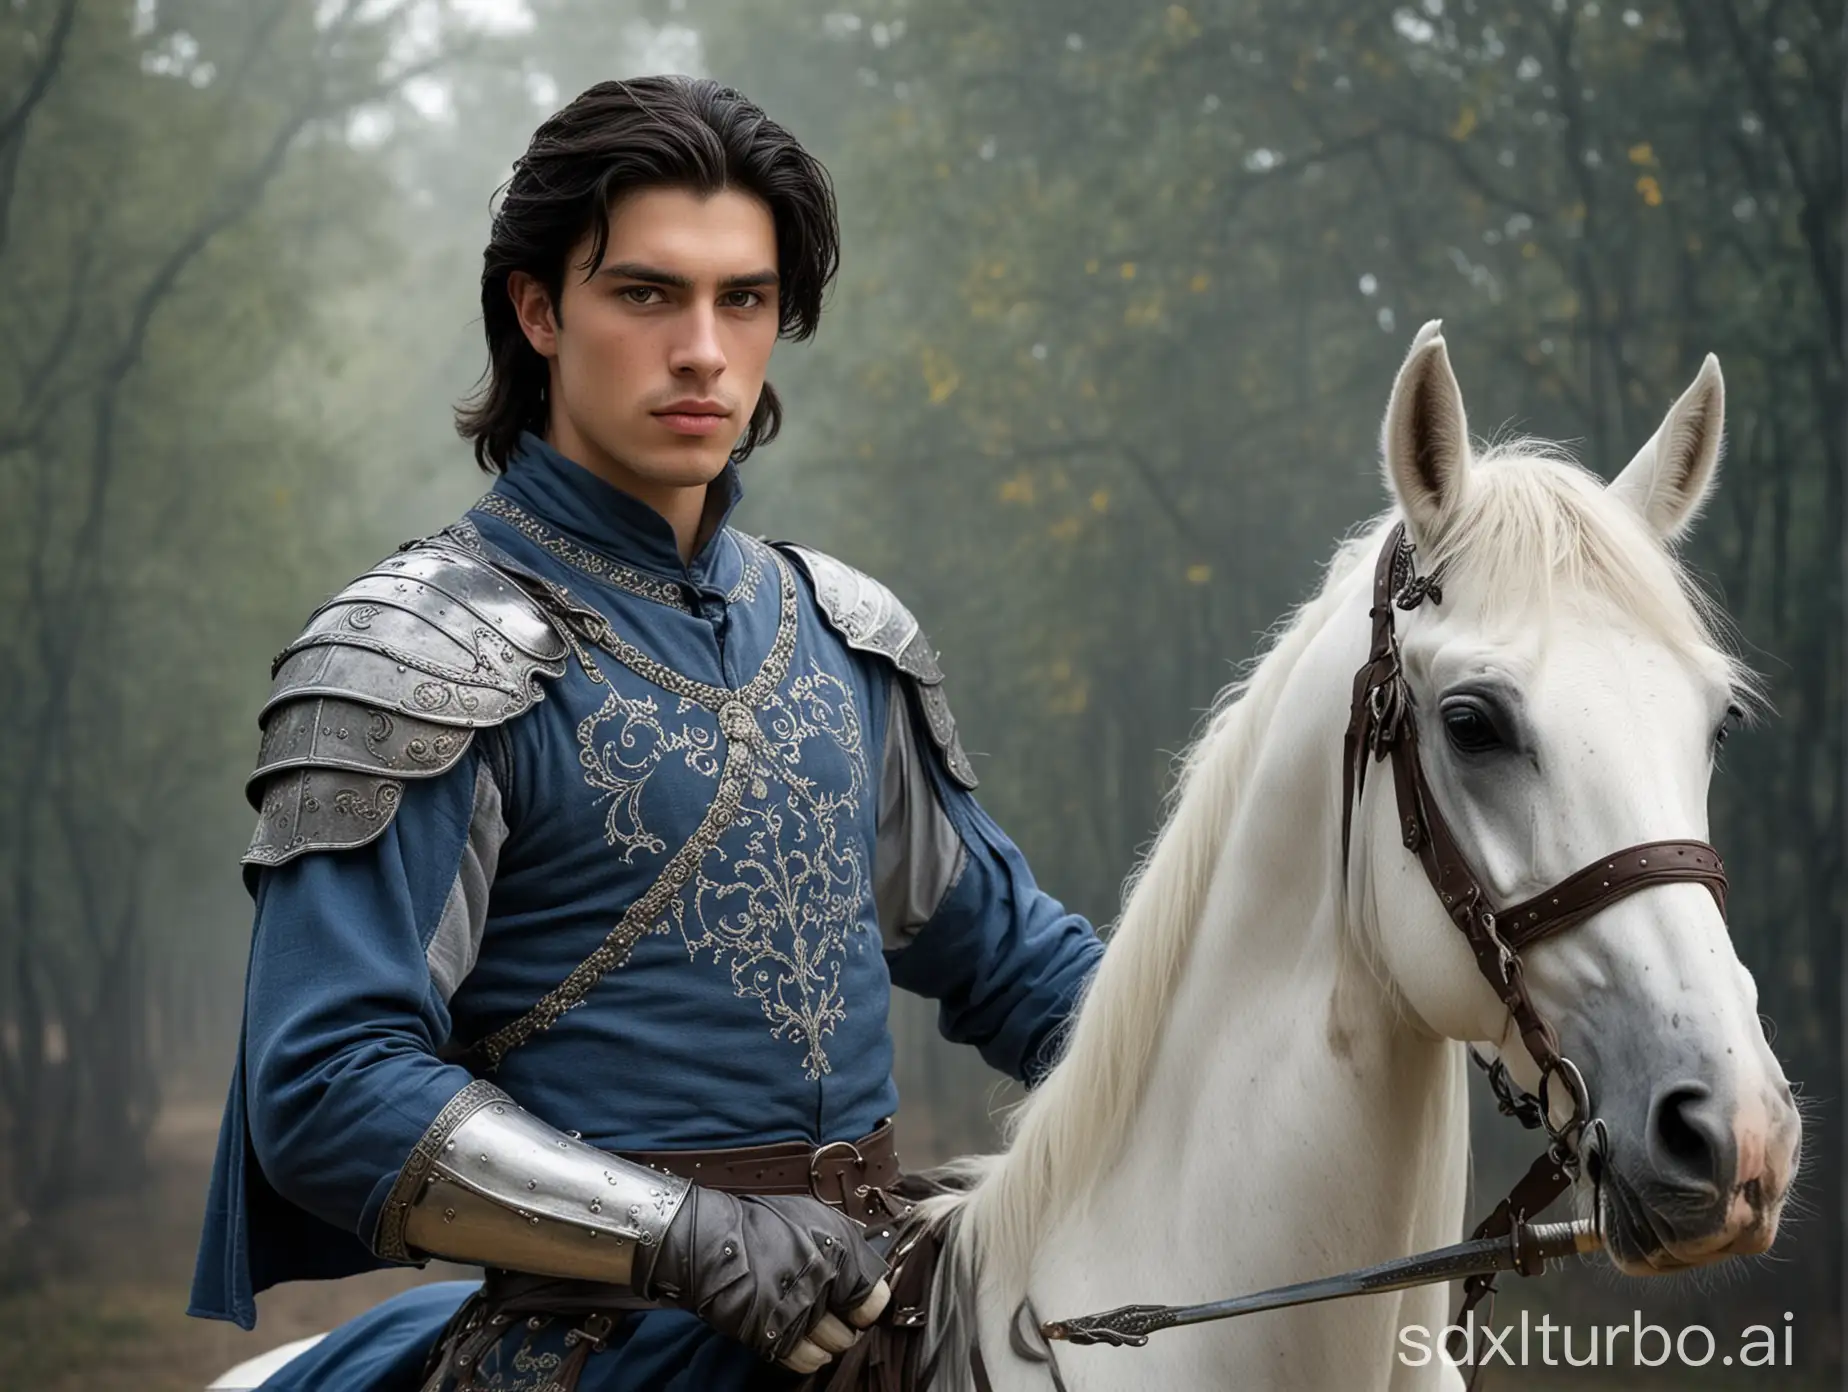 a handsome young man about 25 years old, dark hair almost up to shoulders, in gray-blue medieval nice outfit and with a two-handed sword^ stands near a white  saddled horse.